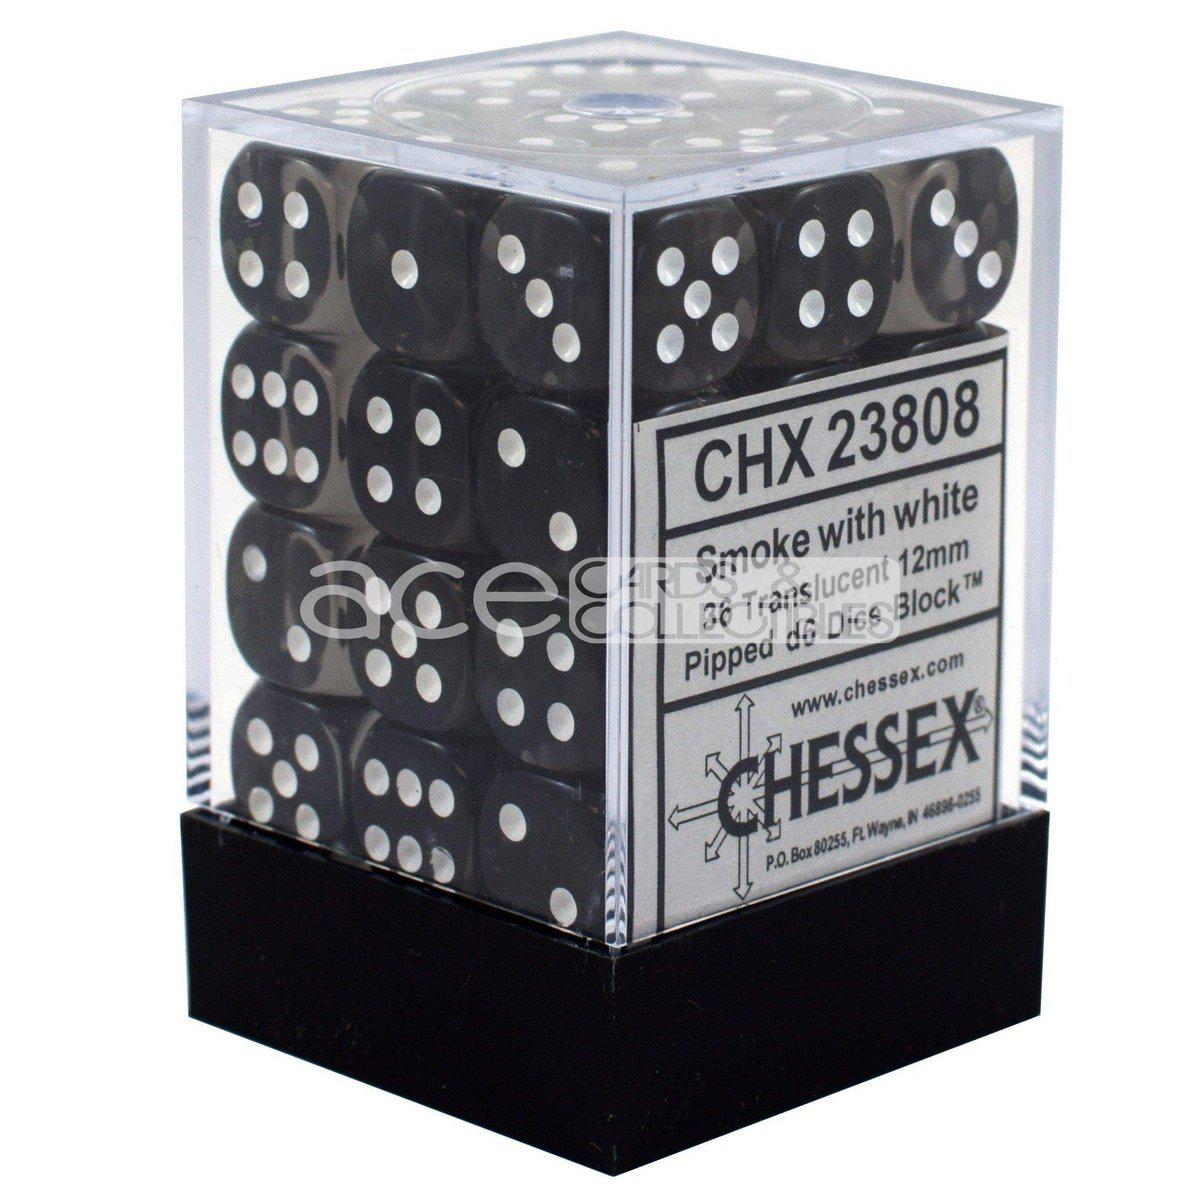 Chessex Translucent 12mm d6 36pcs Dice (Smoke/White) [CHX23808]-Chessex-Ace Cards & Collectibles